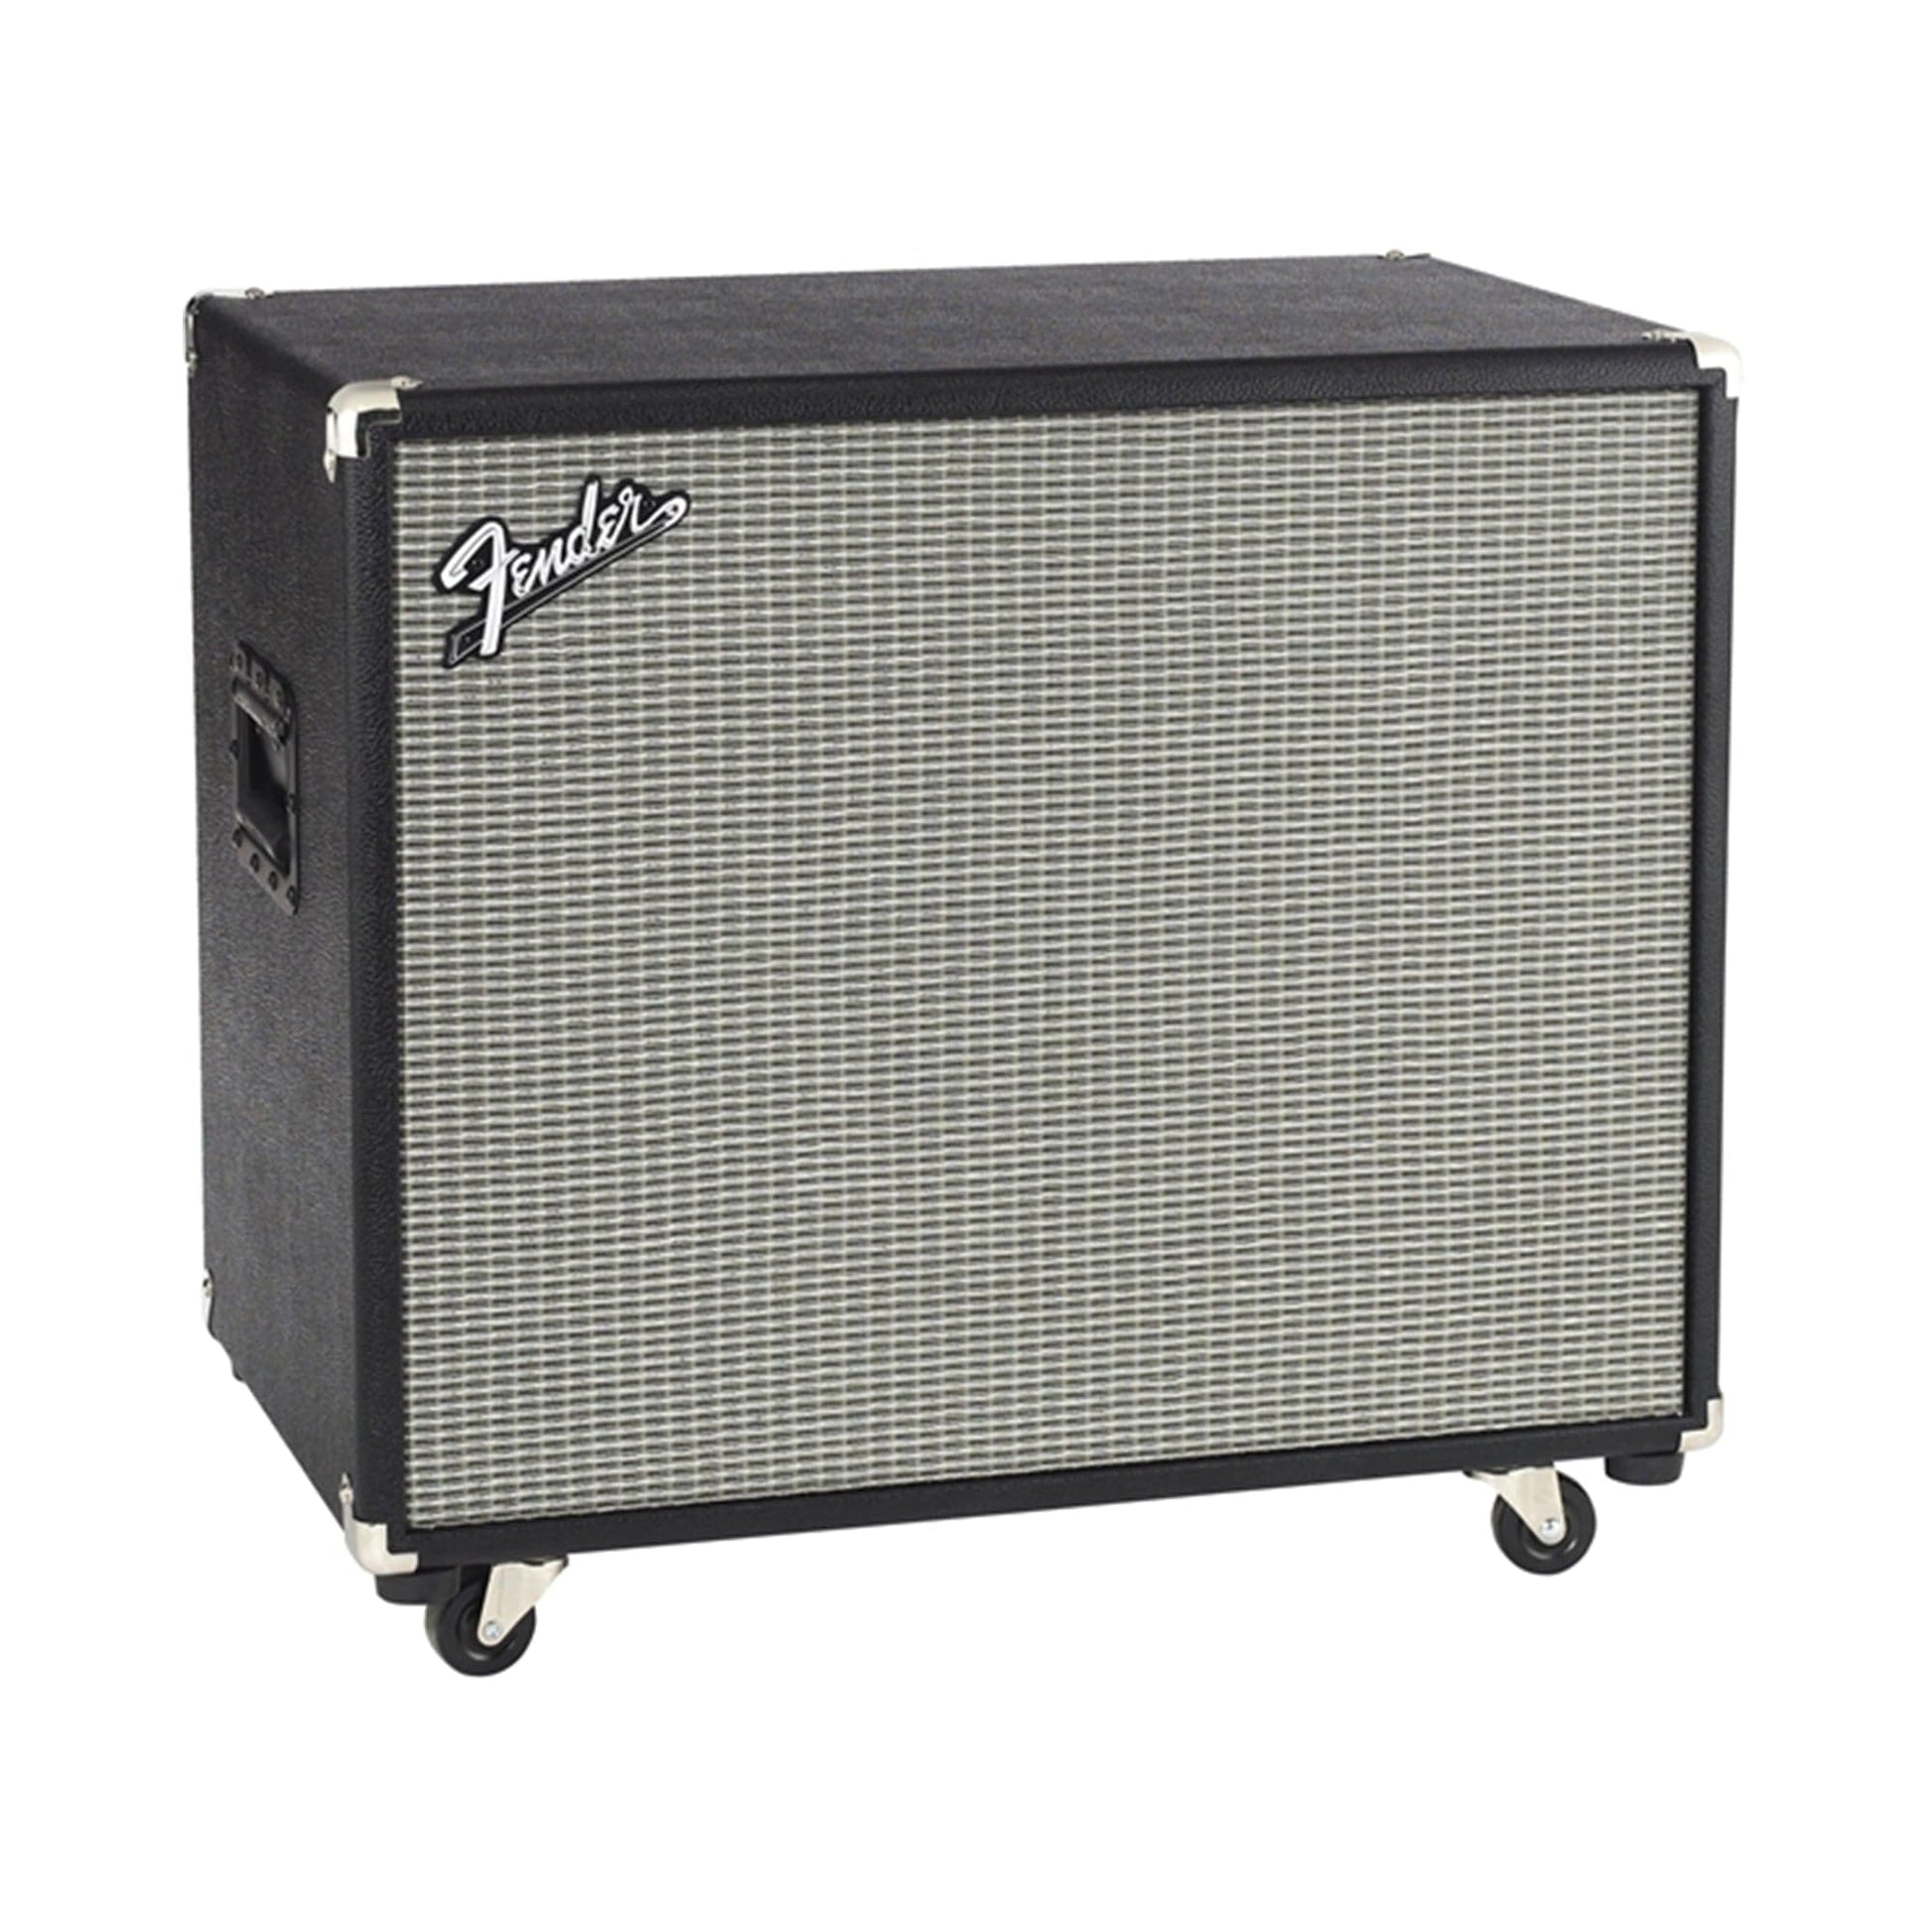 Fender Bassman 115 Neo Cabinet Amps / Bass Cabinets